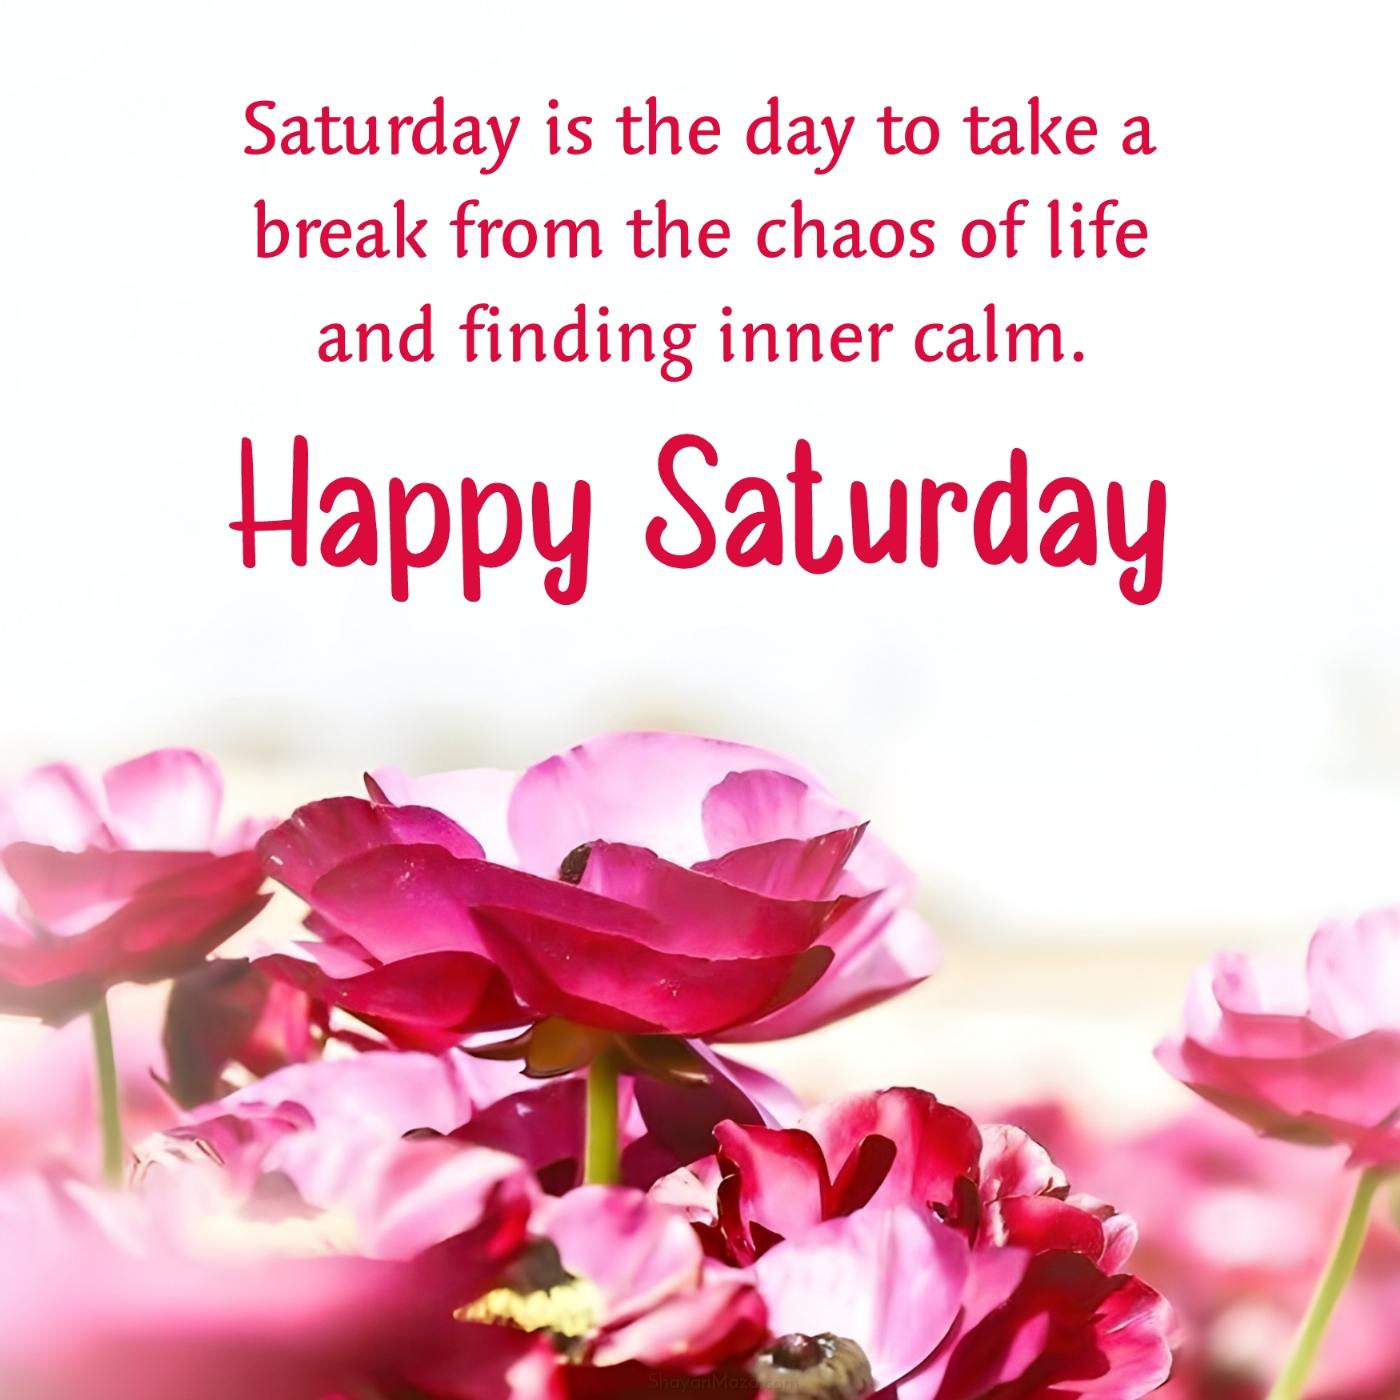 Saturday is the day to take a break from the chaos of life